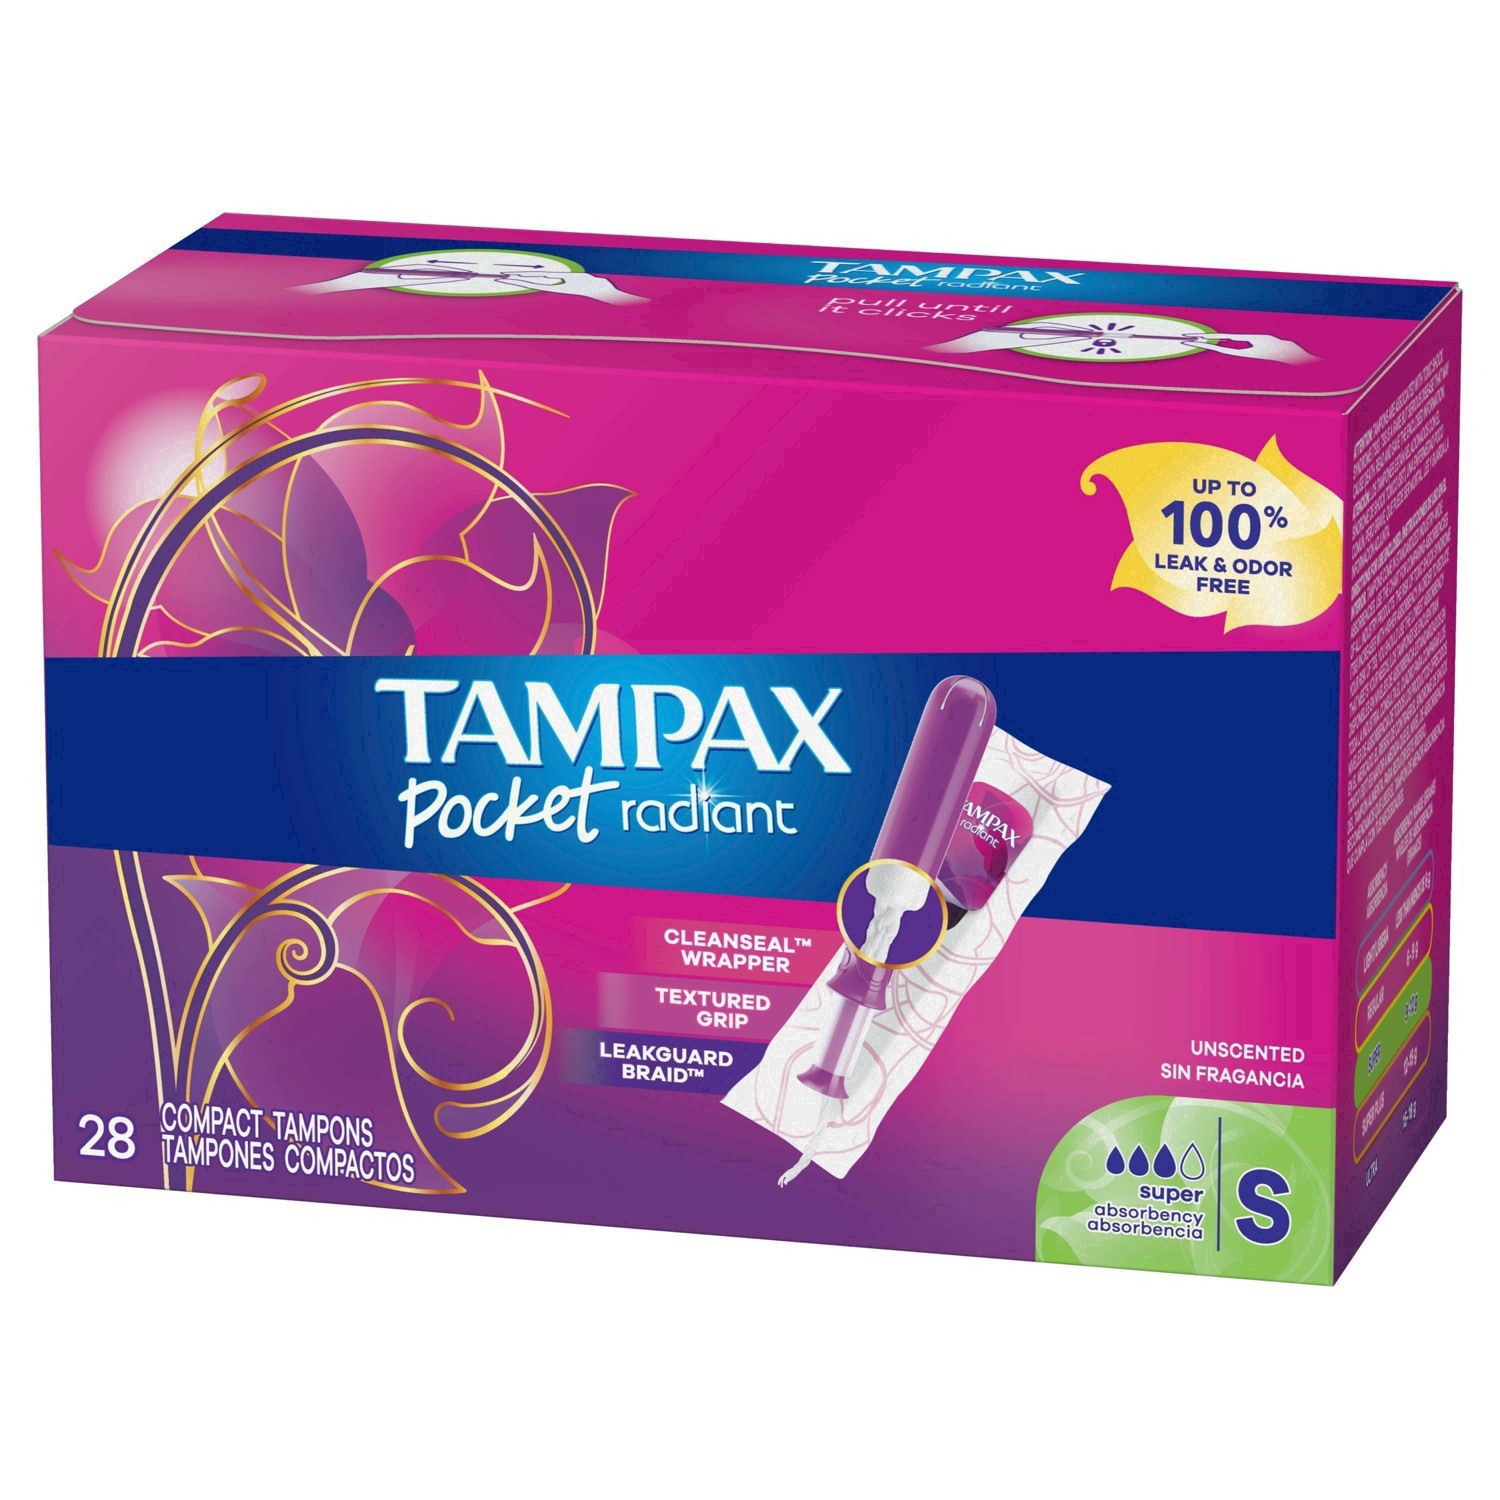 slide 21 of 94, Tampax Pocket Radiant Compact Plastic Tampons, With LeakGuard Braid, Super Absorbency, Unscented, 28 Count, 28 ct